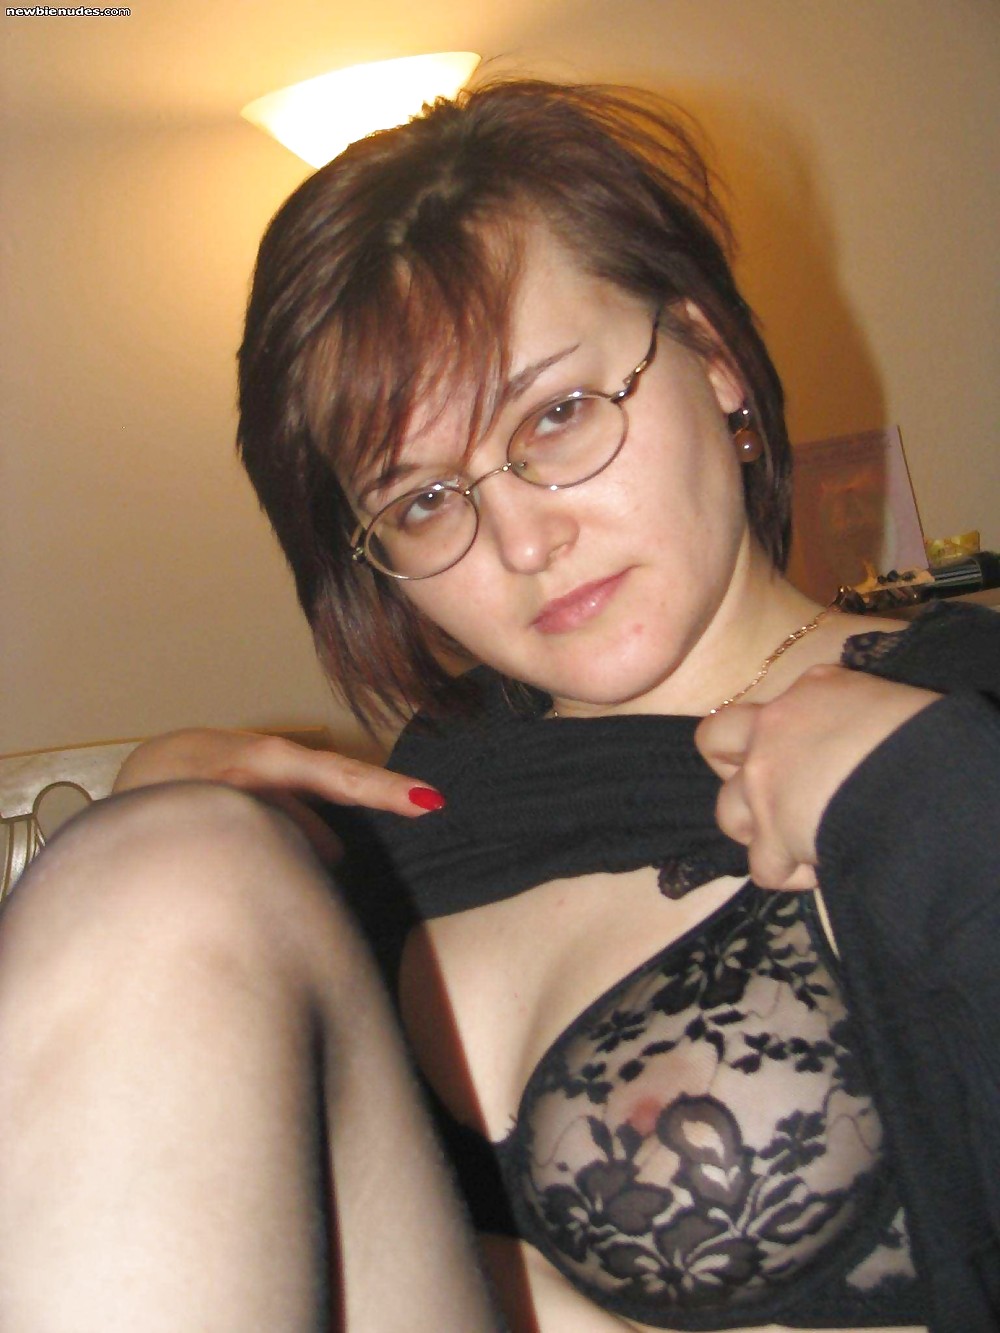 Sex Gallery Girls with glasses 4